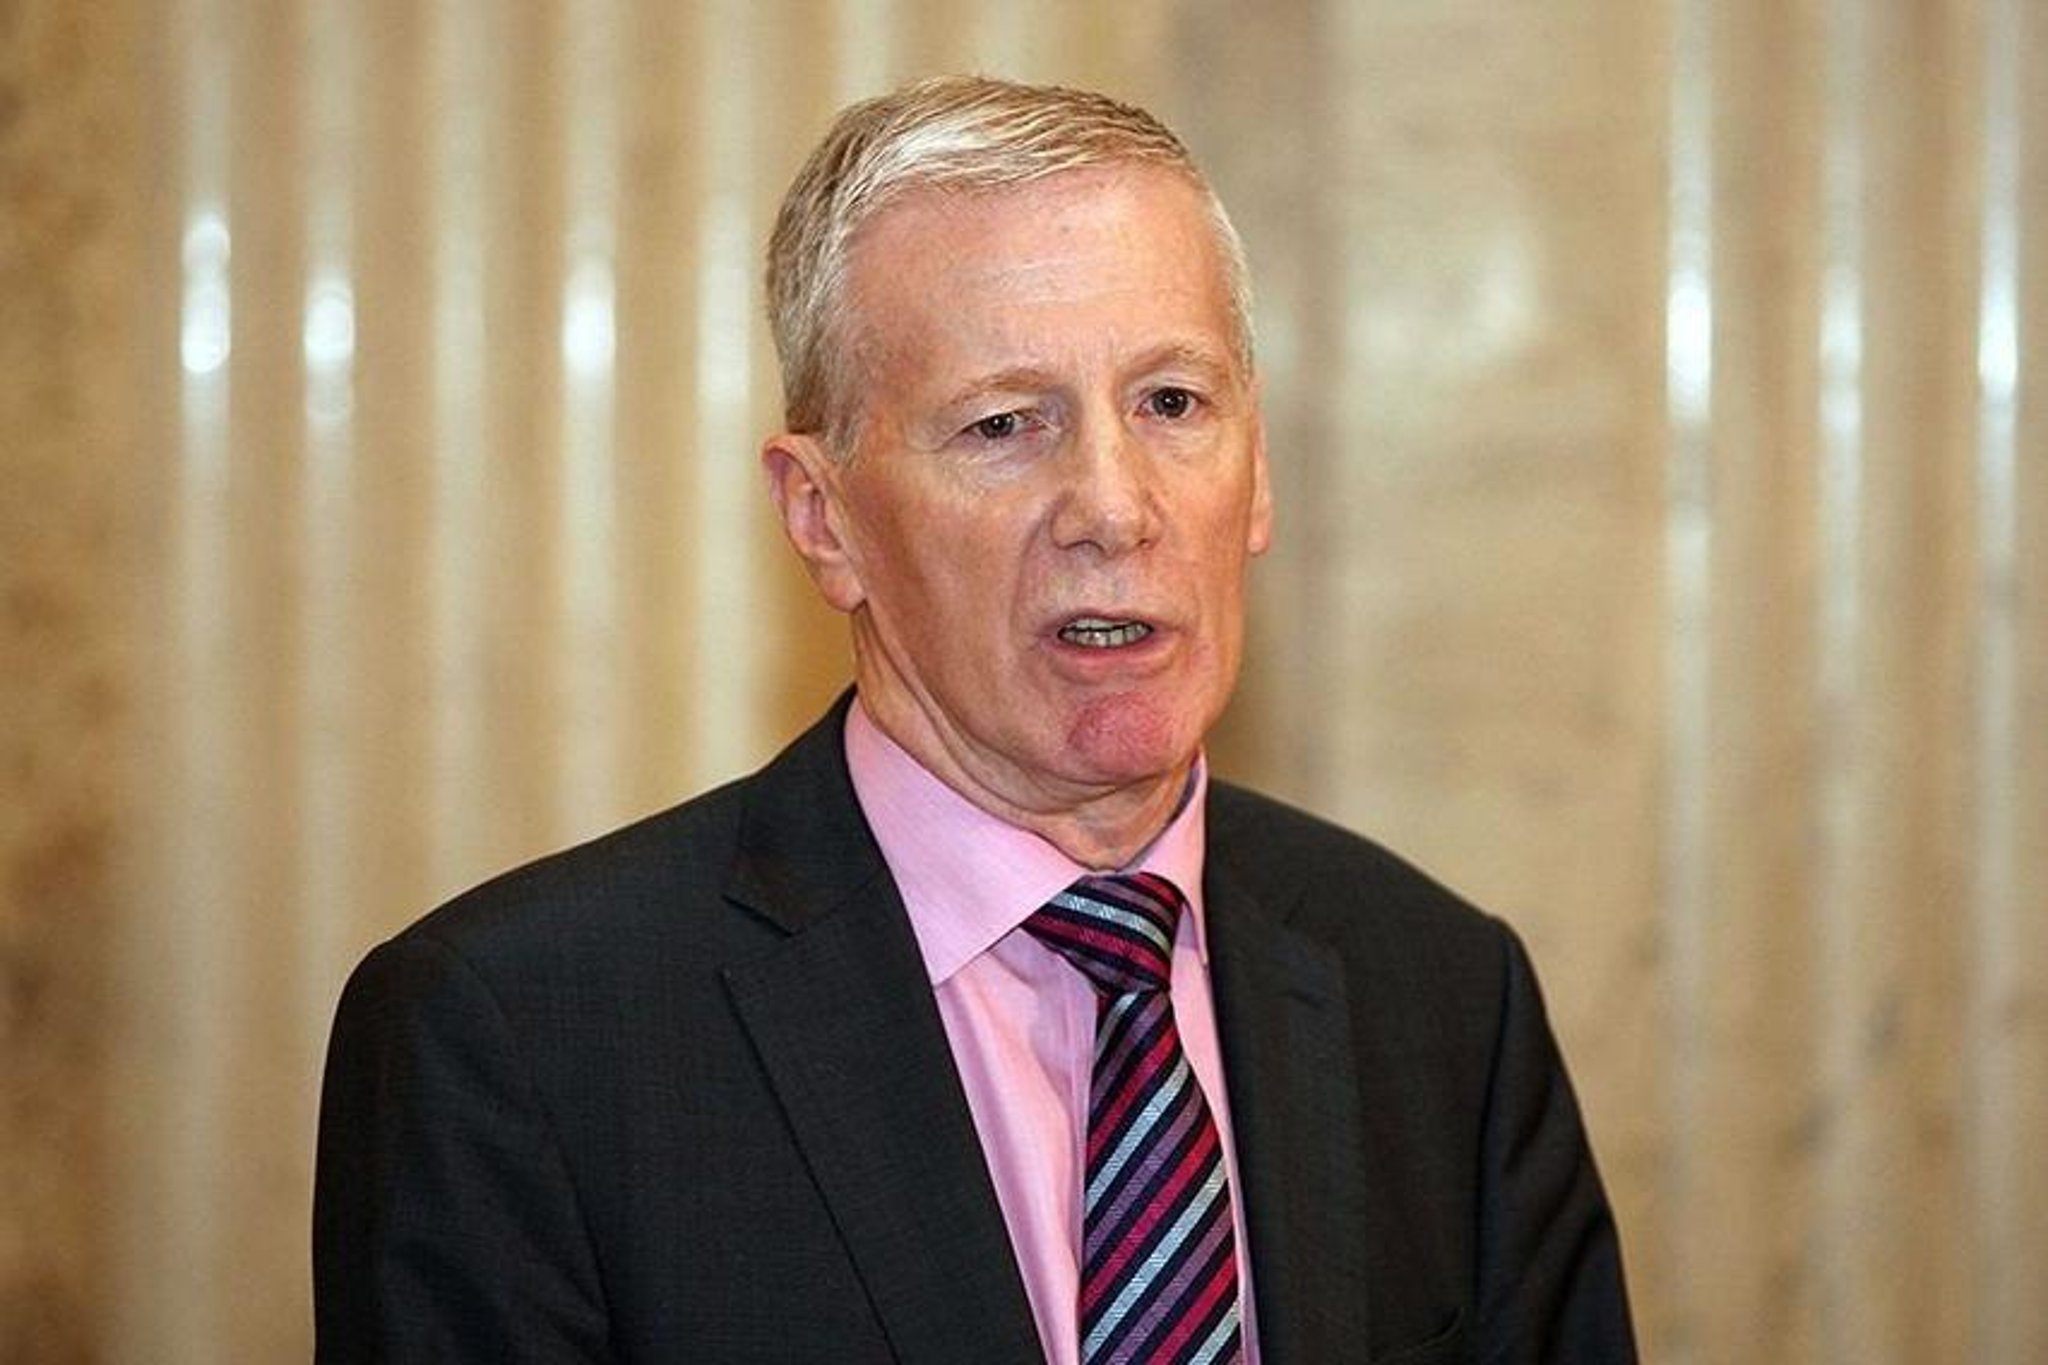 Dublin must answer for role in Troubles: DUP MP